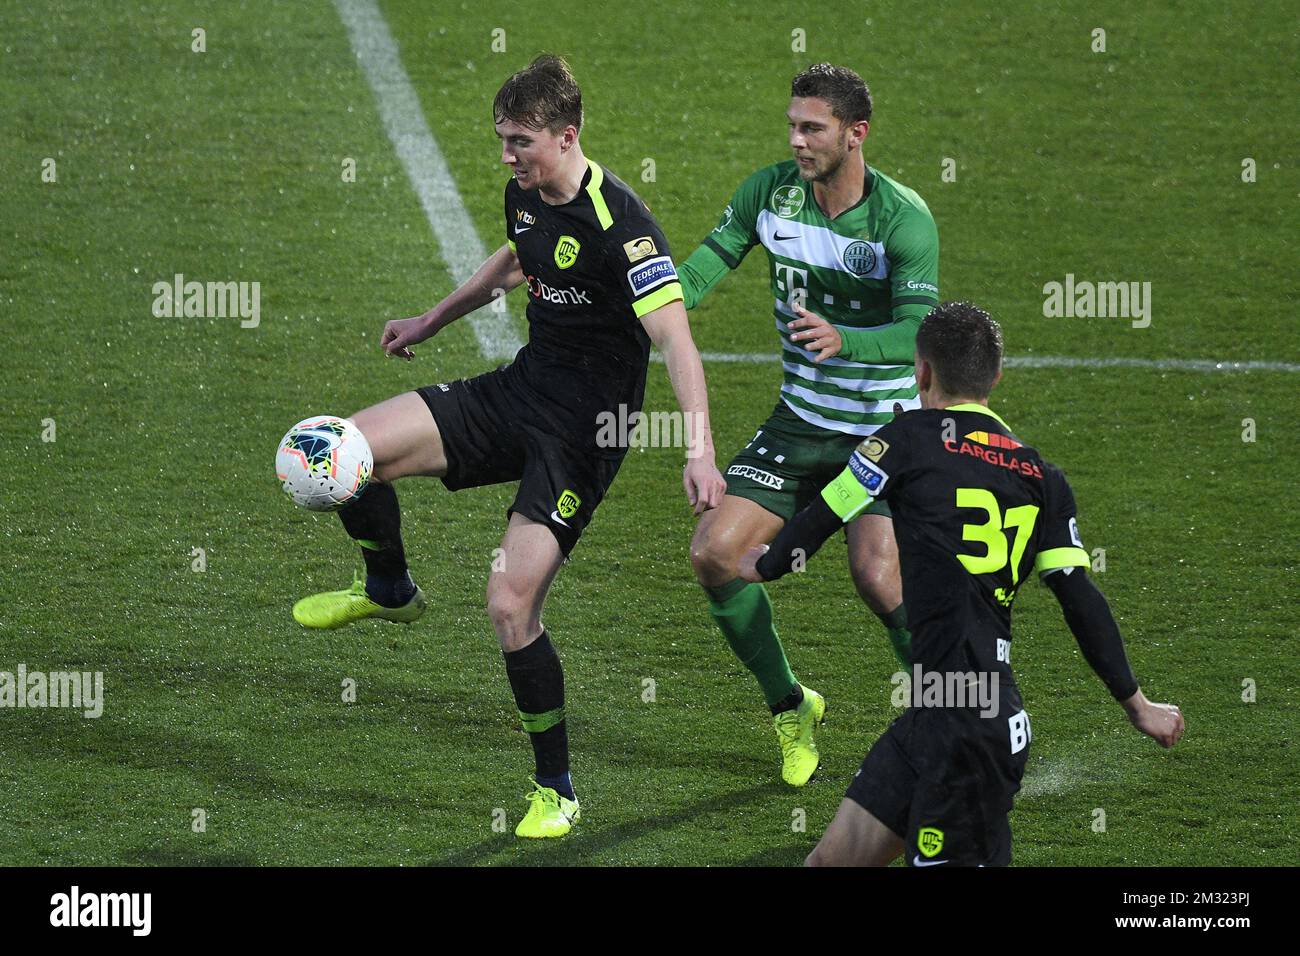 Genk's Kristian Thorstvedt and Ferencvaros' Balint Vecsei fight for the ball during a friendly soccer match between KRC Genk and Hungarian club Ferencvarosi Torna Club, during their winter training camps, Friday 10 January 2020 in La Nucia, Spain. BELGA PHOTO YORICK JANSENS Stock Photo